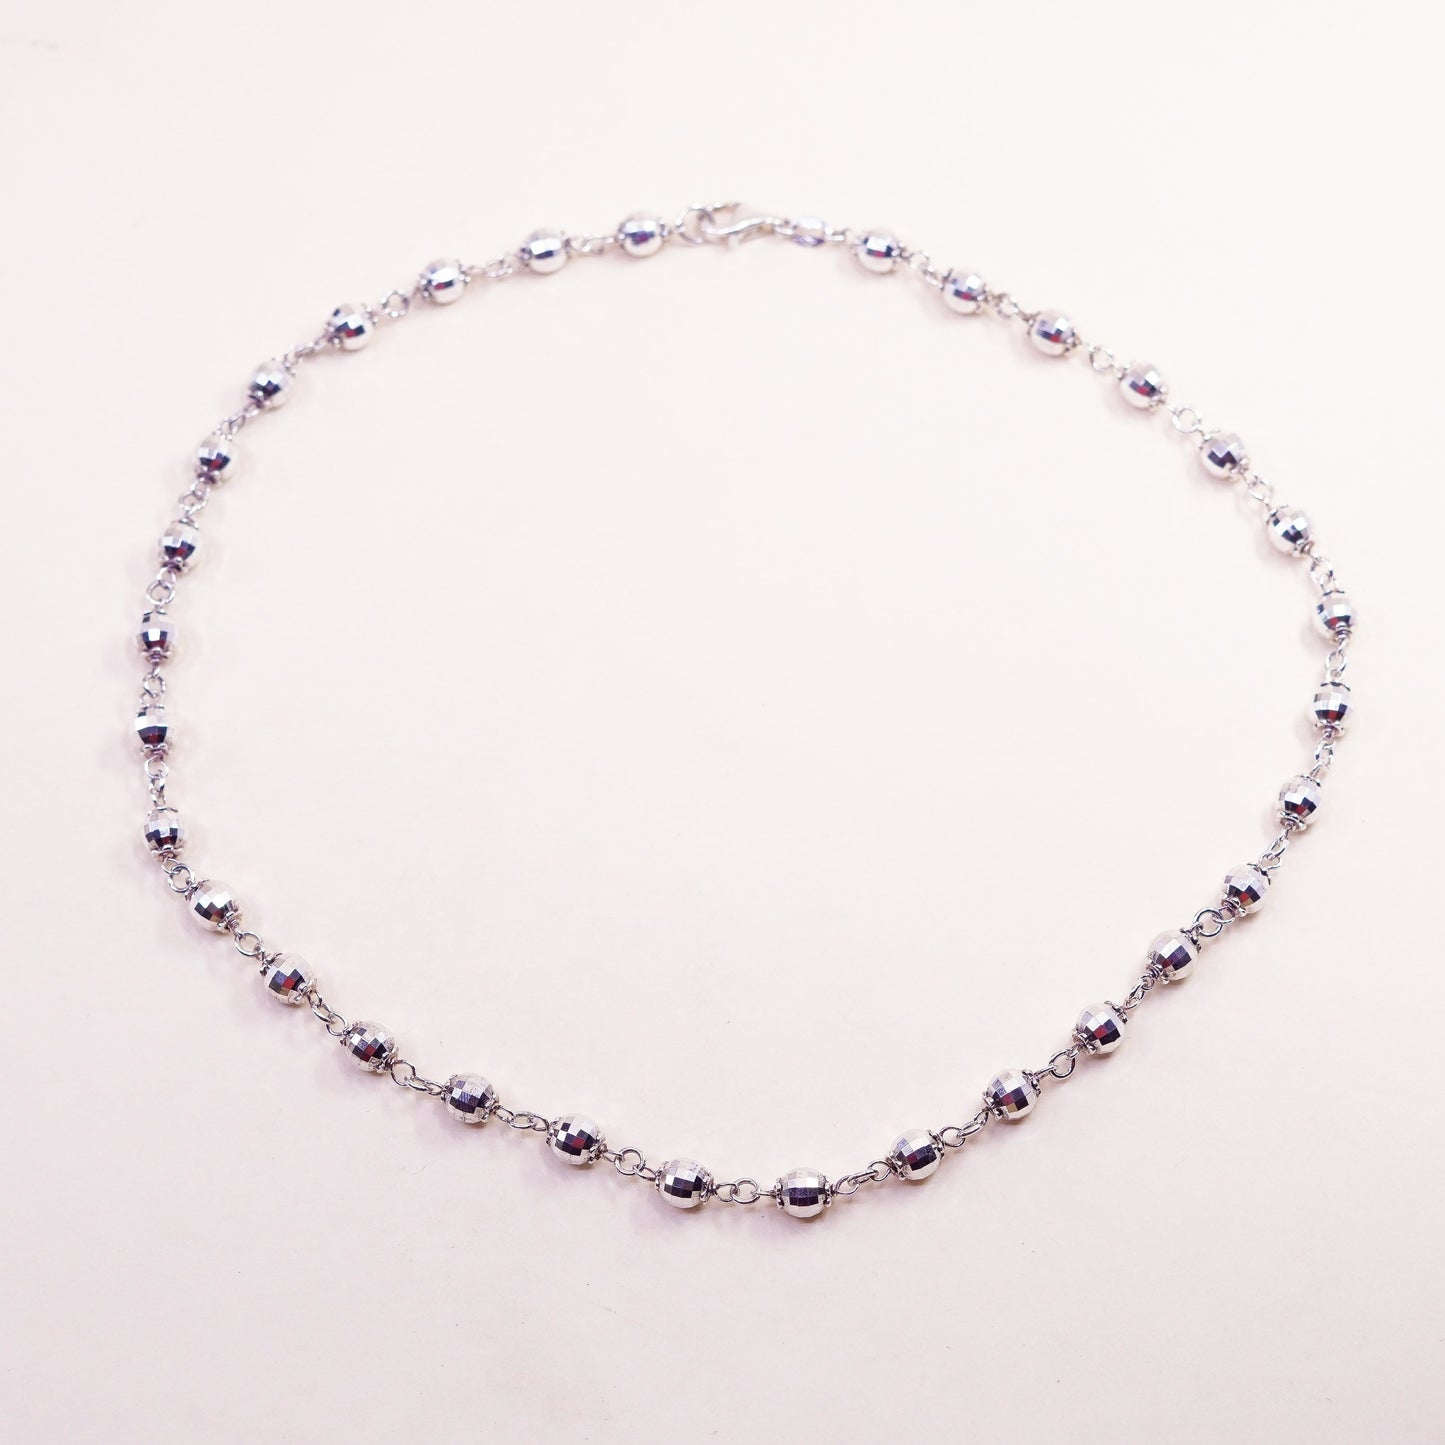 20”, Italy Milor Sterling silver necklace, Italy 925 fine silver beads chain